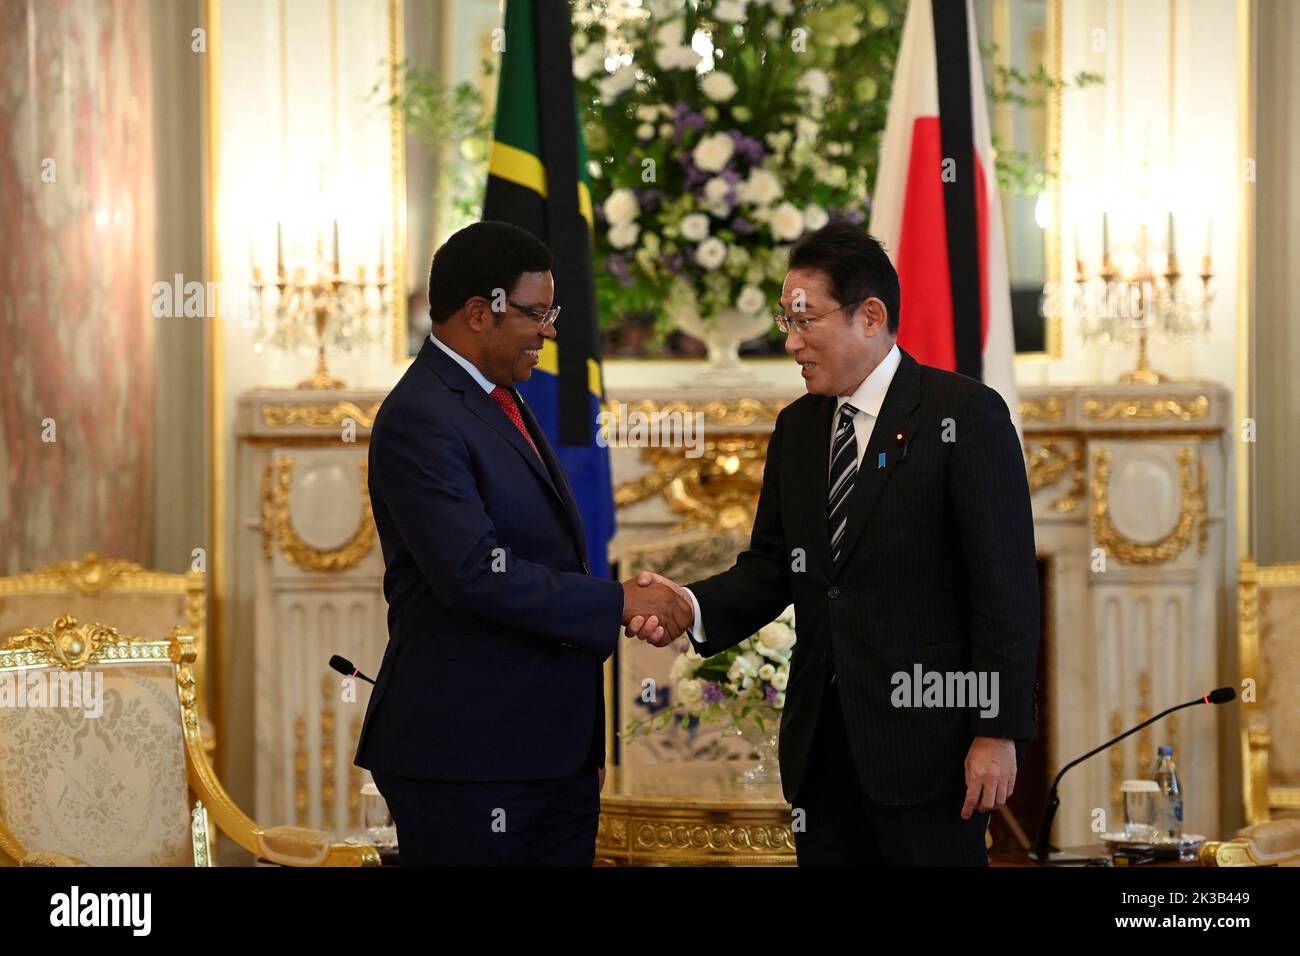 Prime Minister Kassim Majaliwa of United Republic of Tanzania and Japan's Prime Minister Fumio Kishida shake hands as they pose for photographers prior to the Japan-Tanzania summit meeting at Akasaka Palace State Guest House in Tokyo, Japan on September 26, 2022 in Tokyo, Japan.  David Mareuil/Pool via REUTERS Stock Photo